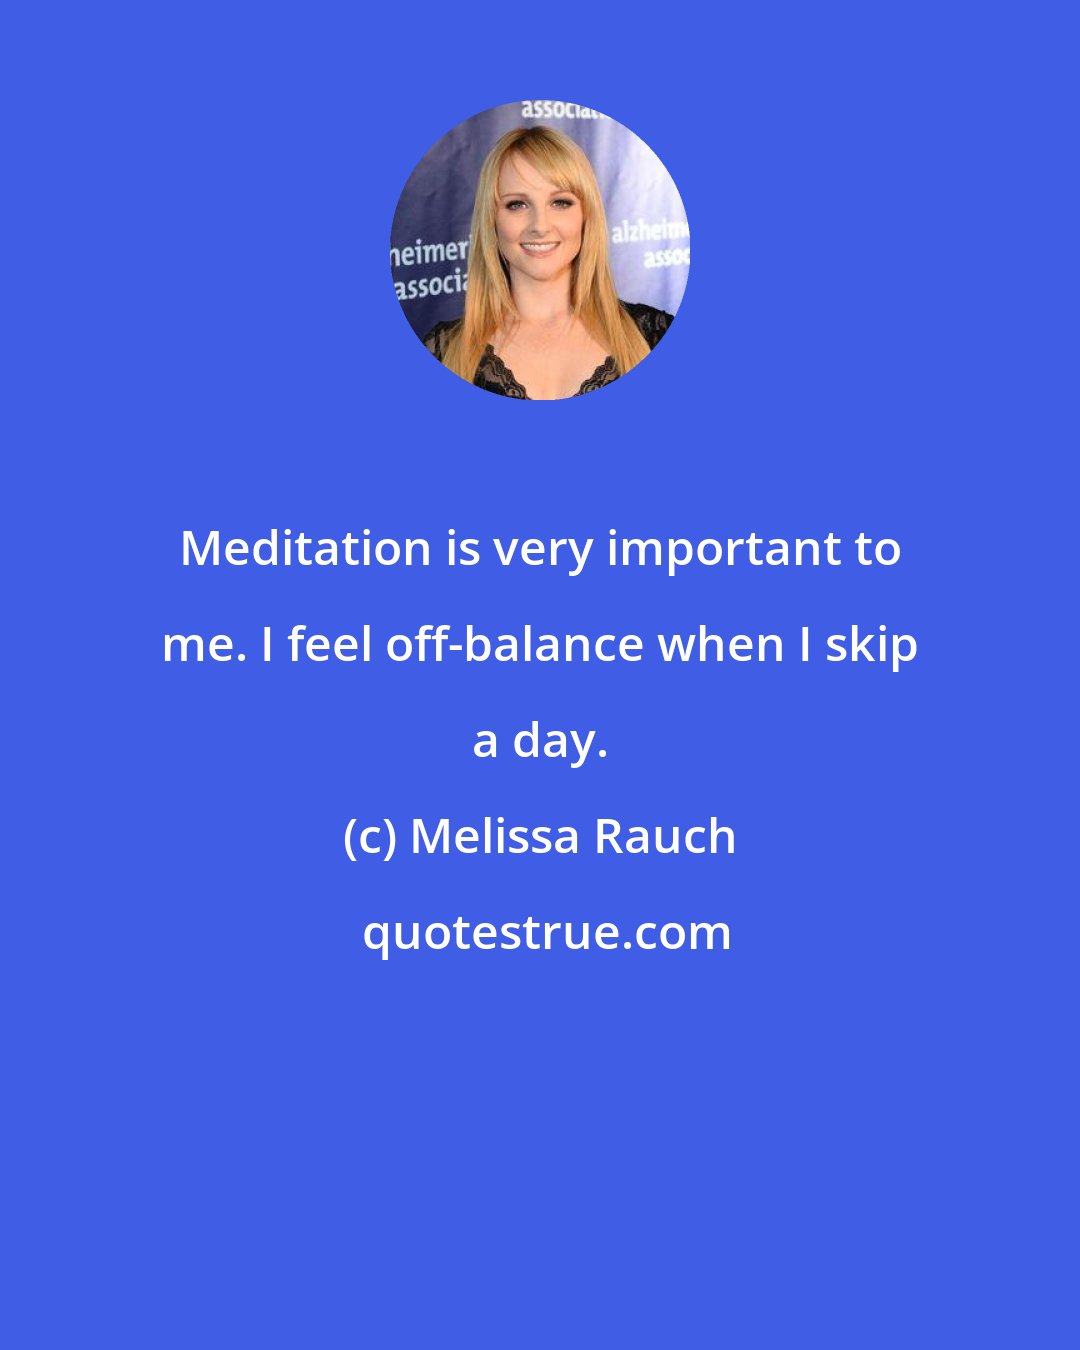 Melissa Rauch: Meditation is very important to me. I feel off-balance when I skip a day.